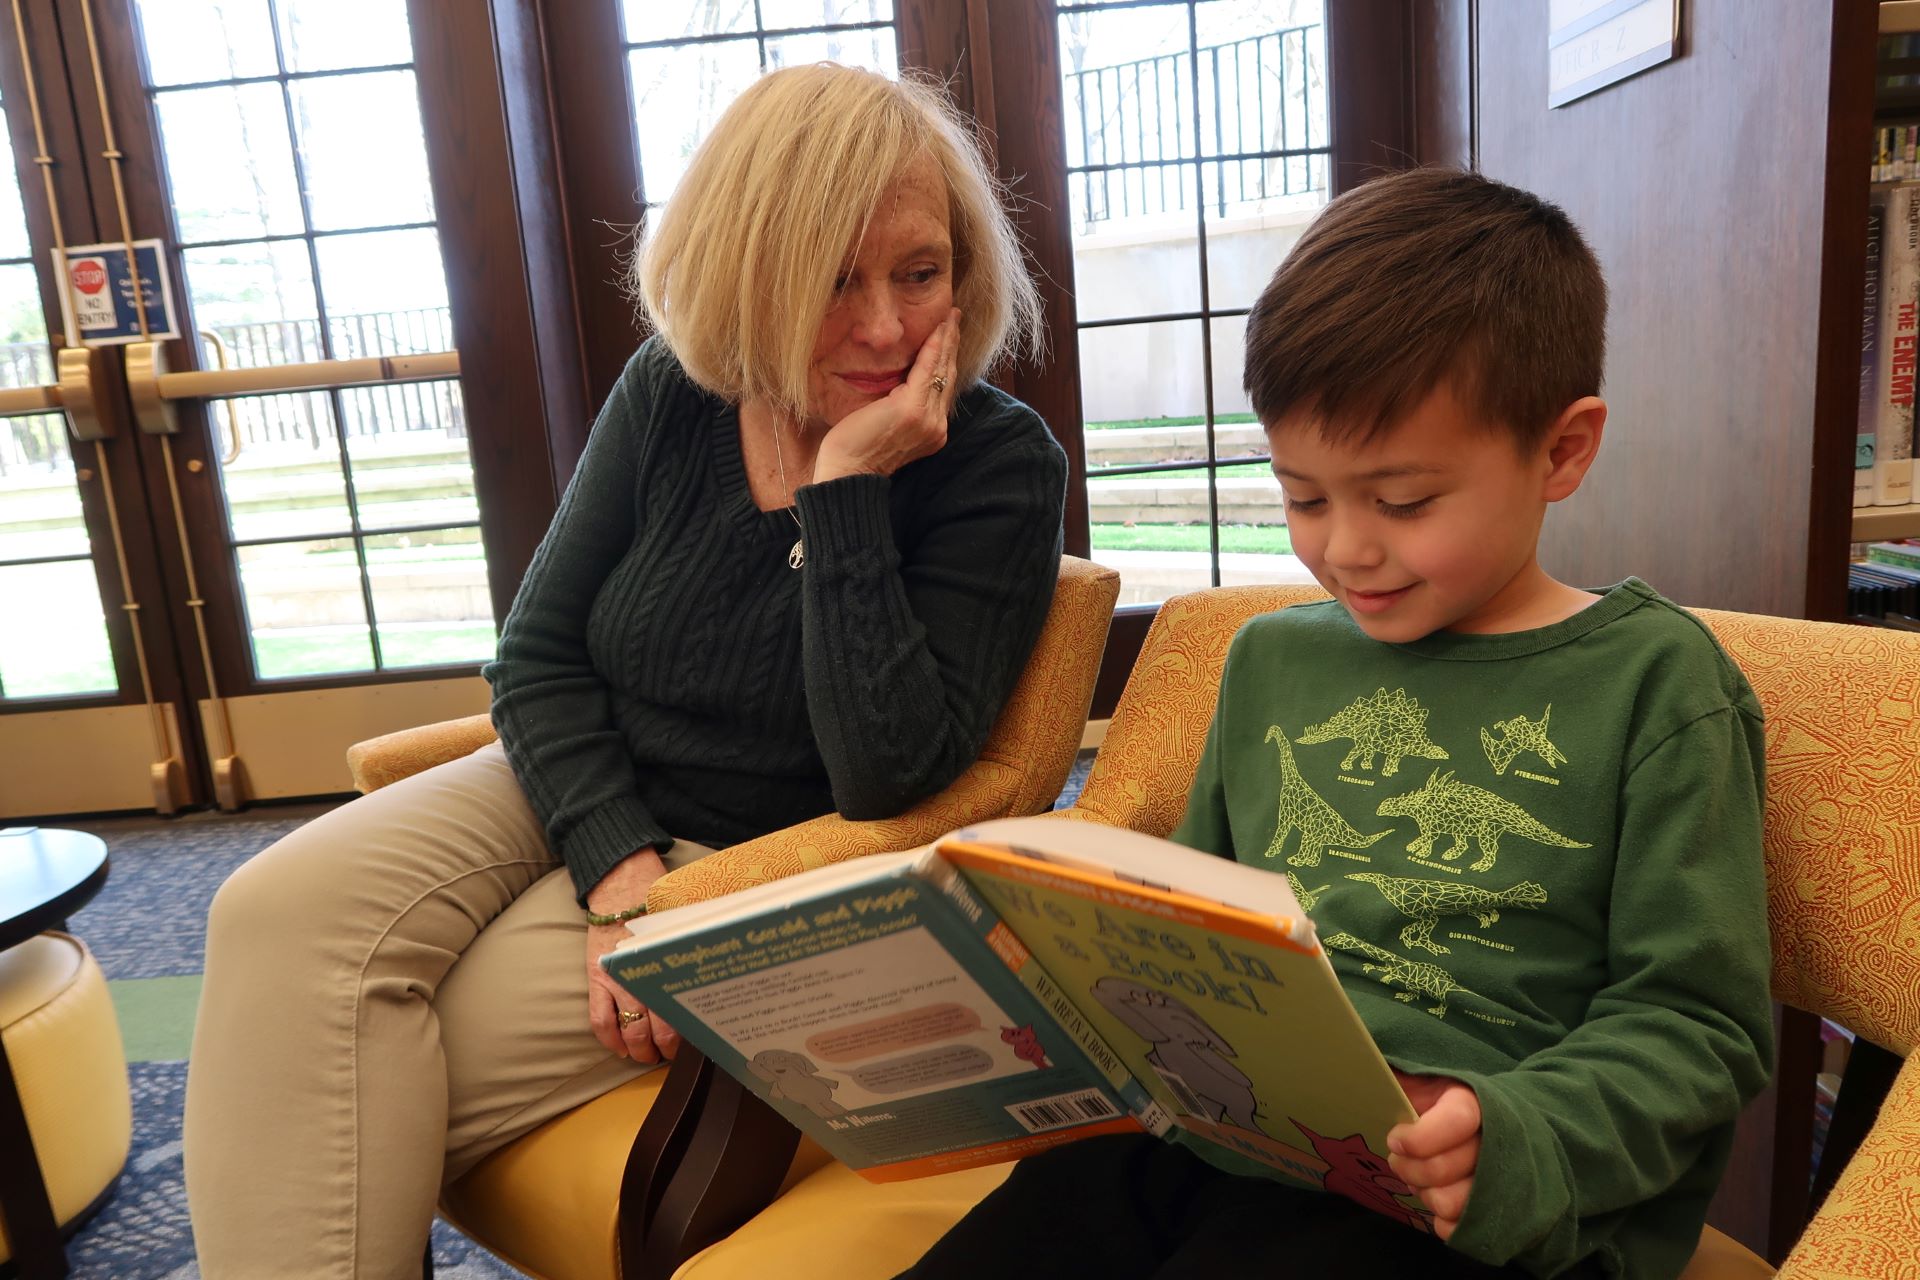 Adult woman reads with child in library.